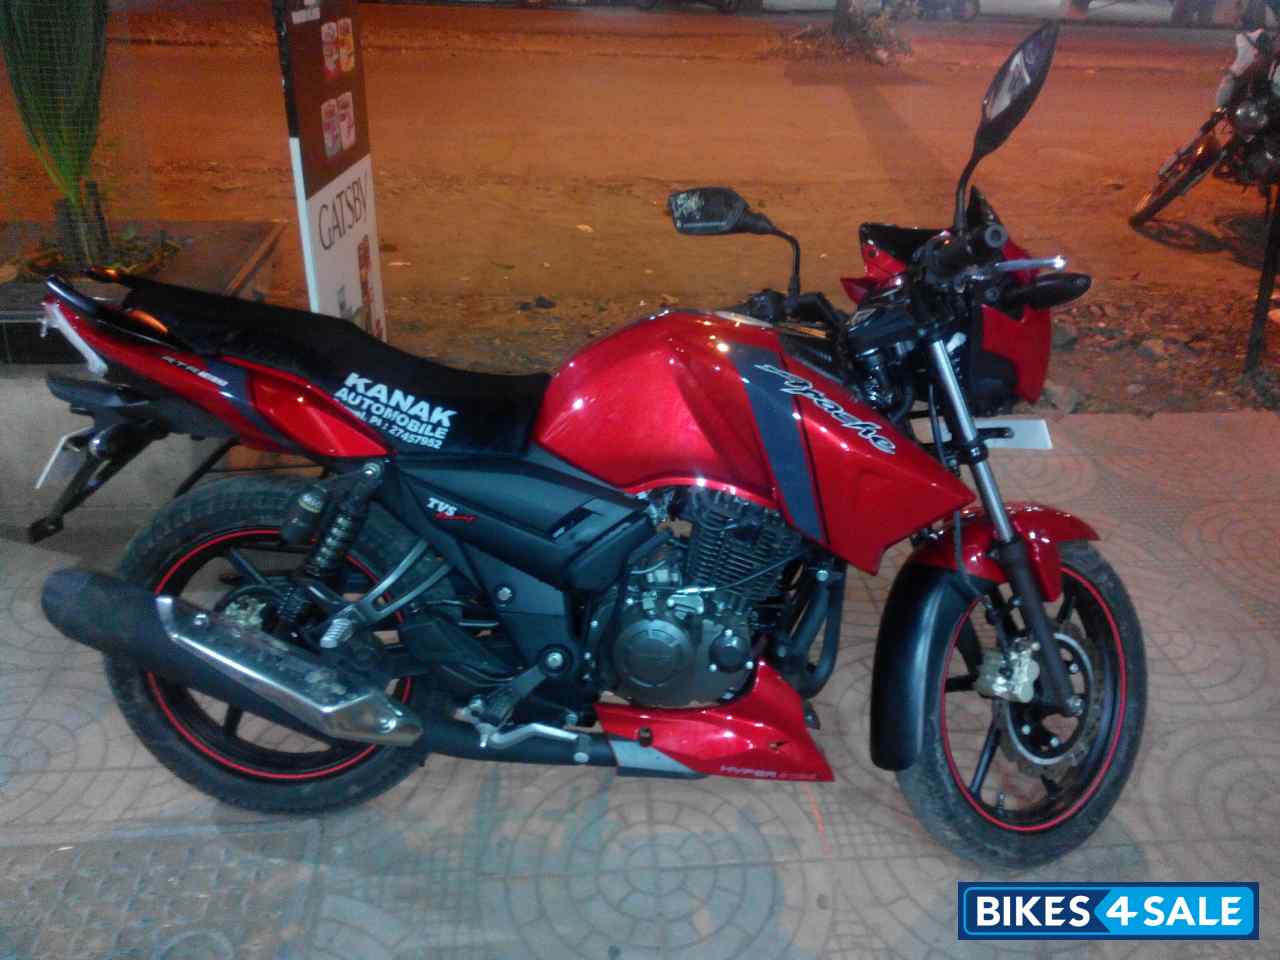 Used 14 Model Tvs Apache Rtr 160 For Sale In Mumbai Id Red Colour Bikes4sale